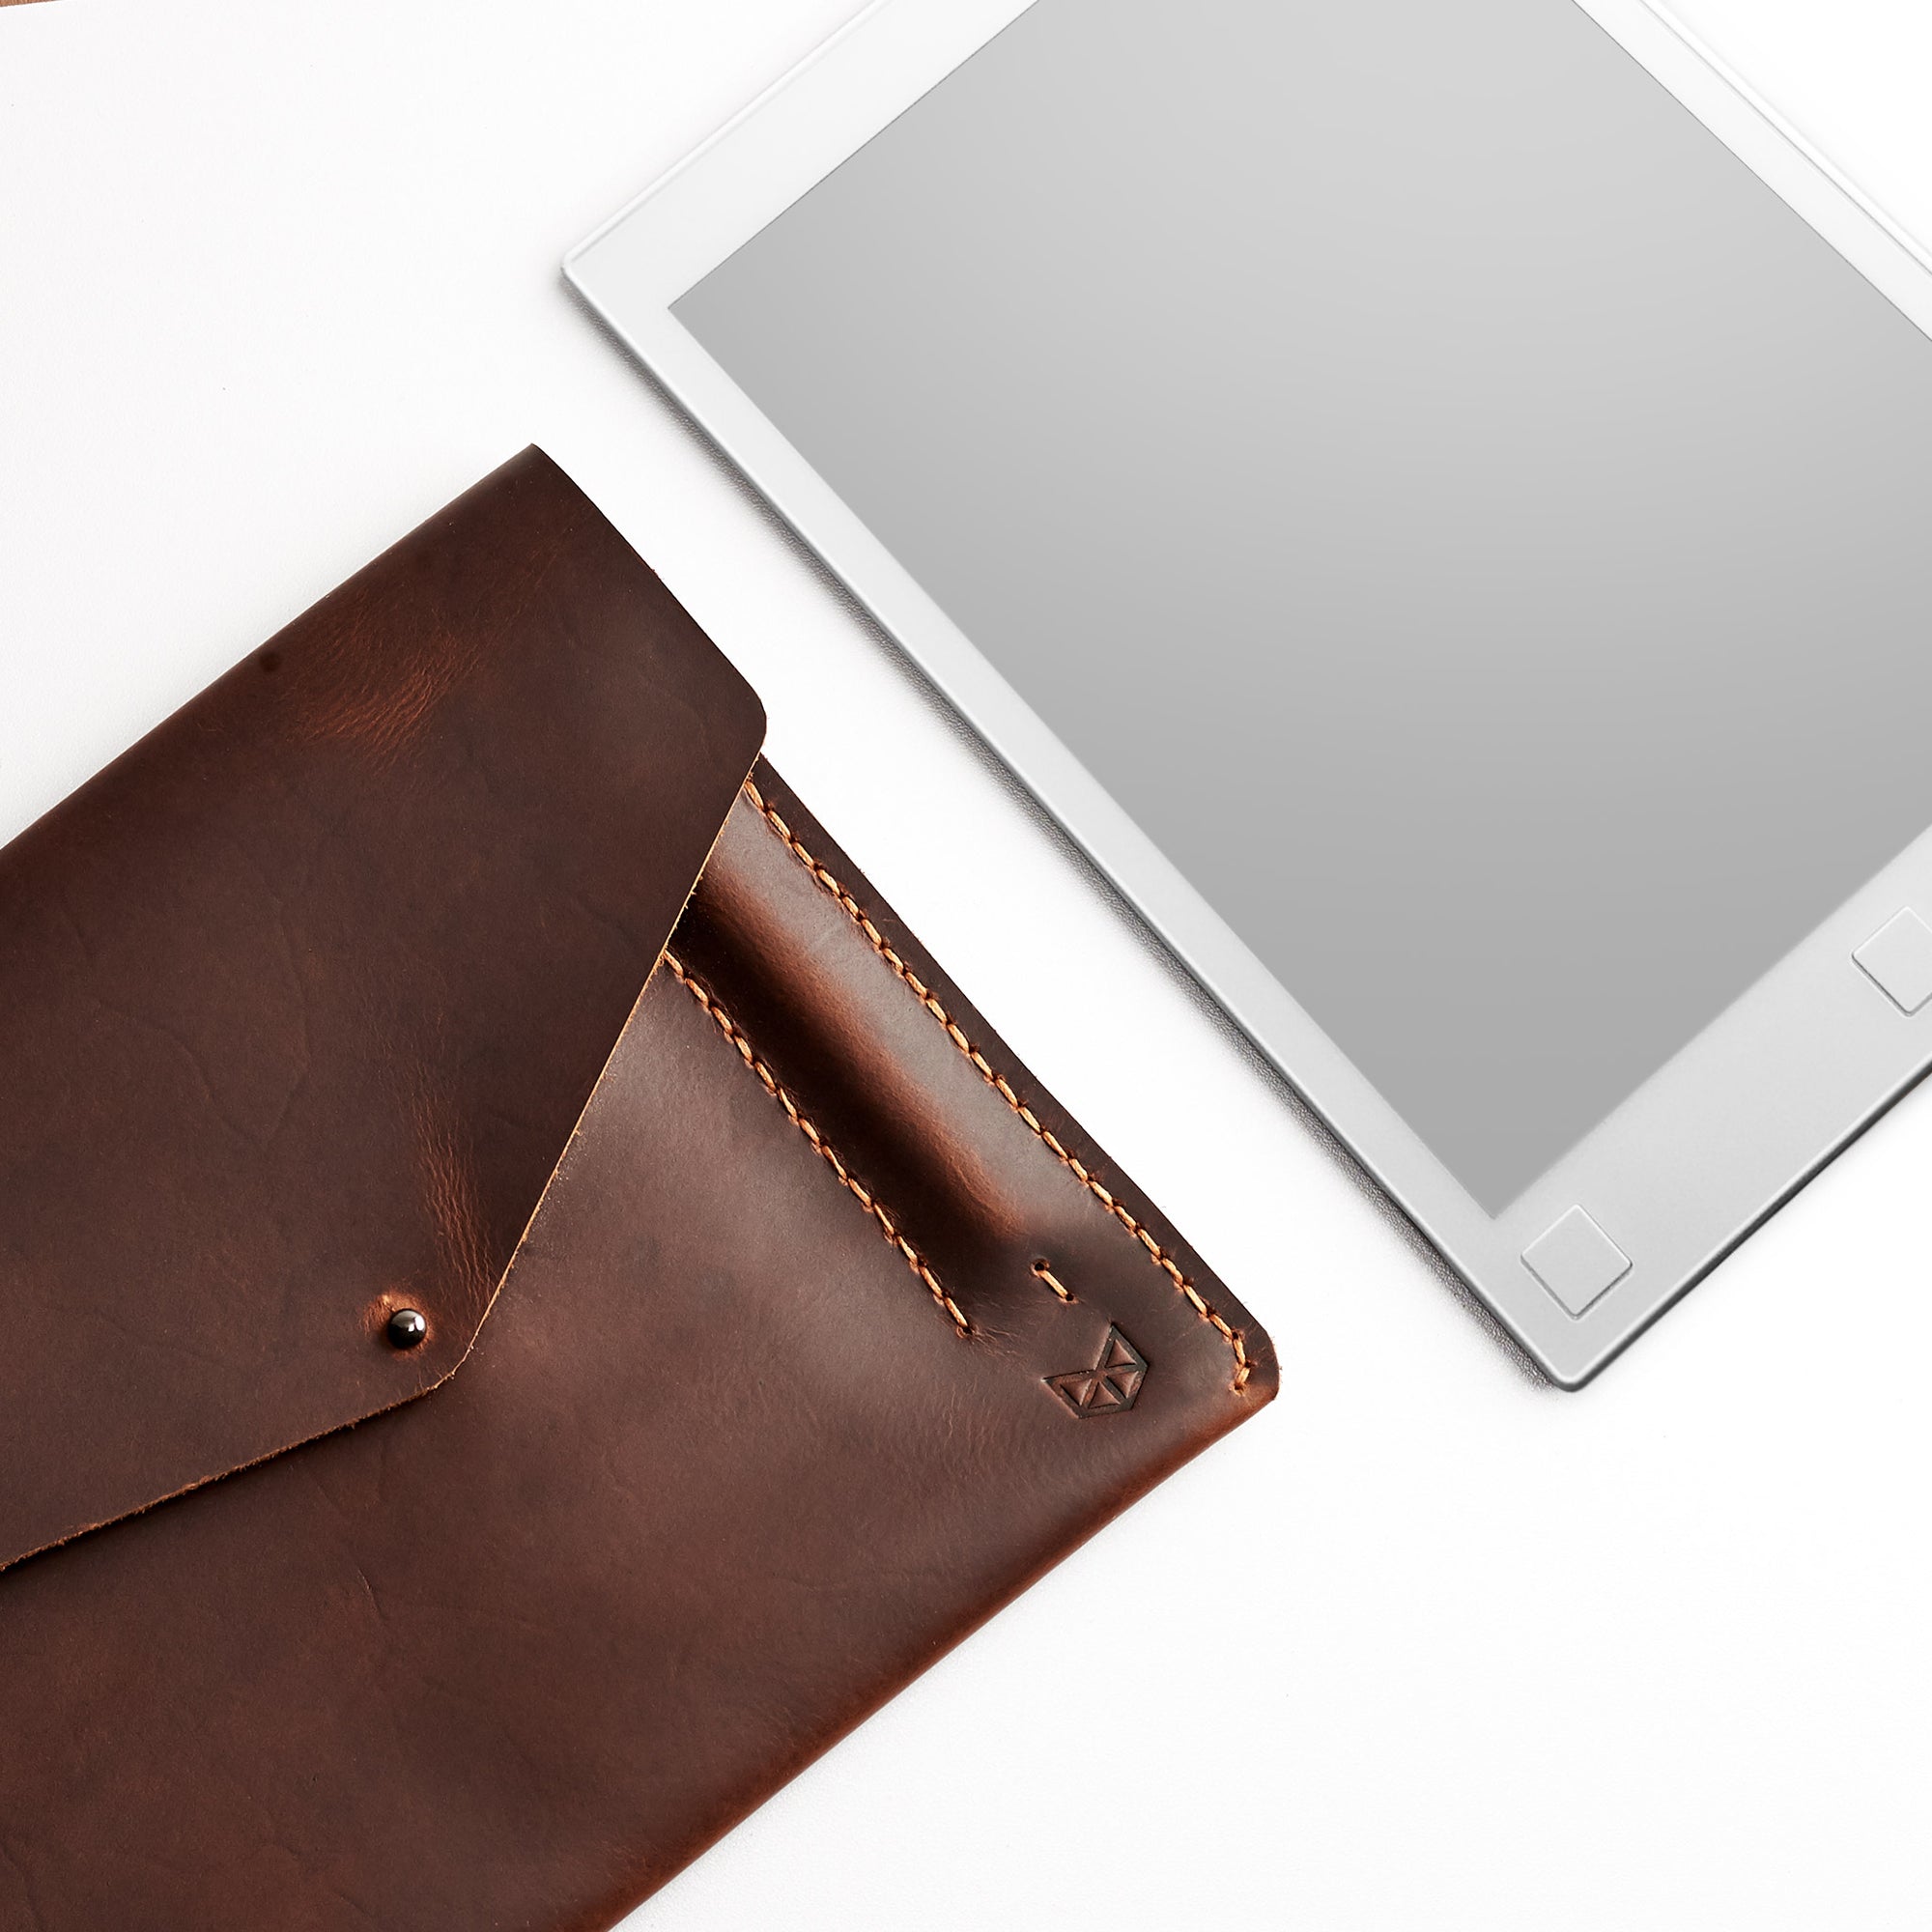 Style. Tan brown handcrafted leather reMarkable tablet case. Folio with Marker holder. Paper E-ink tablet minimalist sleeve design. 